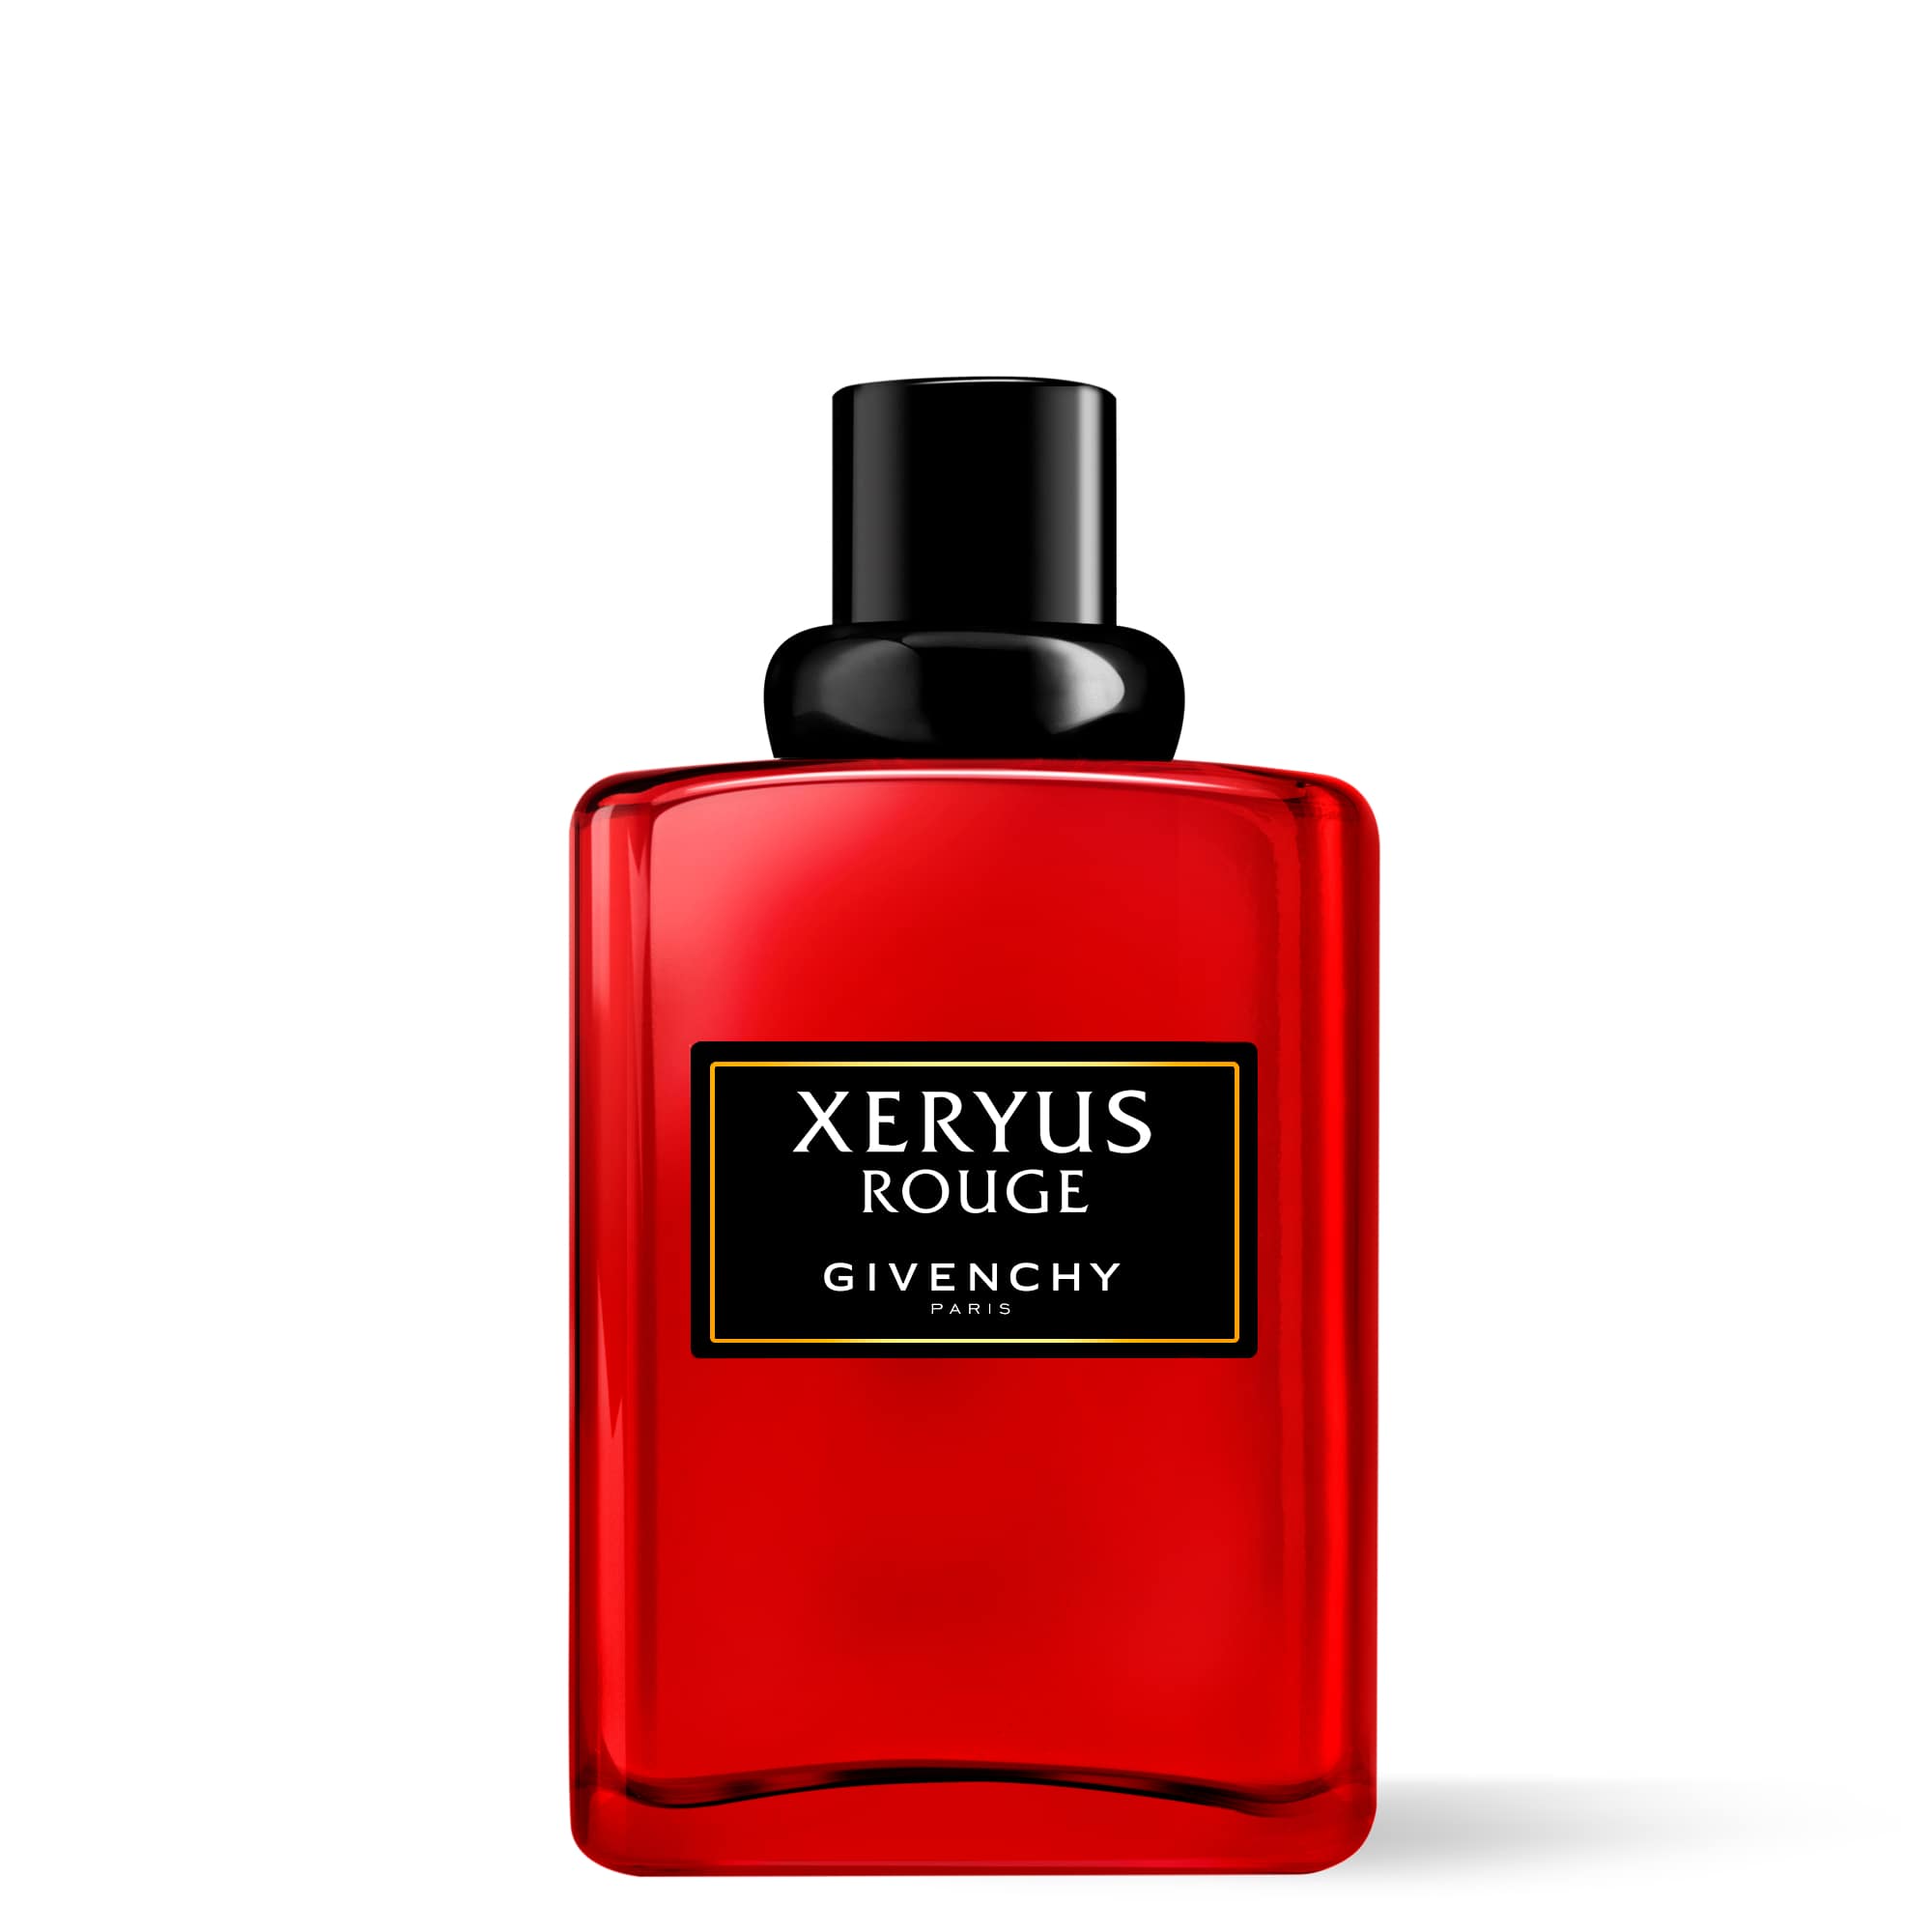 Xeryus Rouge EDT Spray Perfume for Men by Givenchy